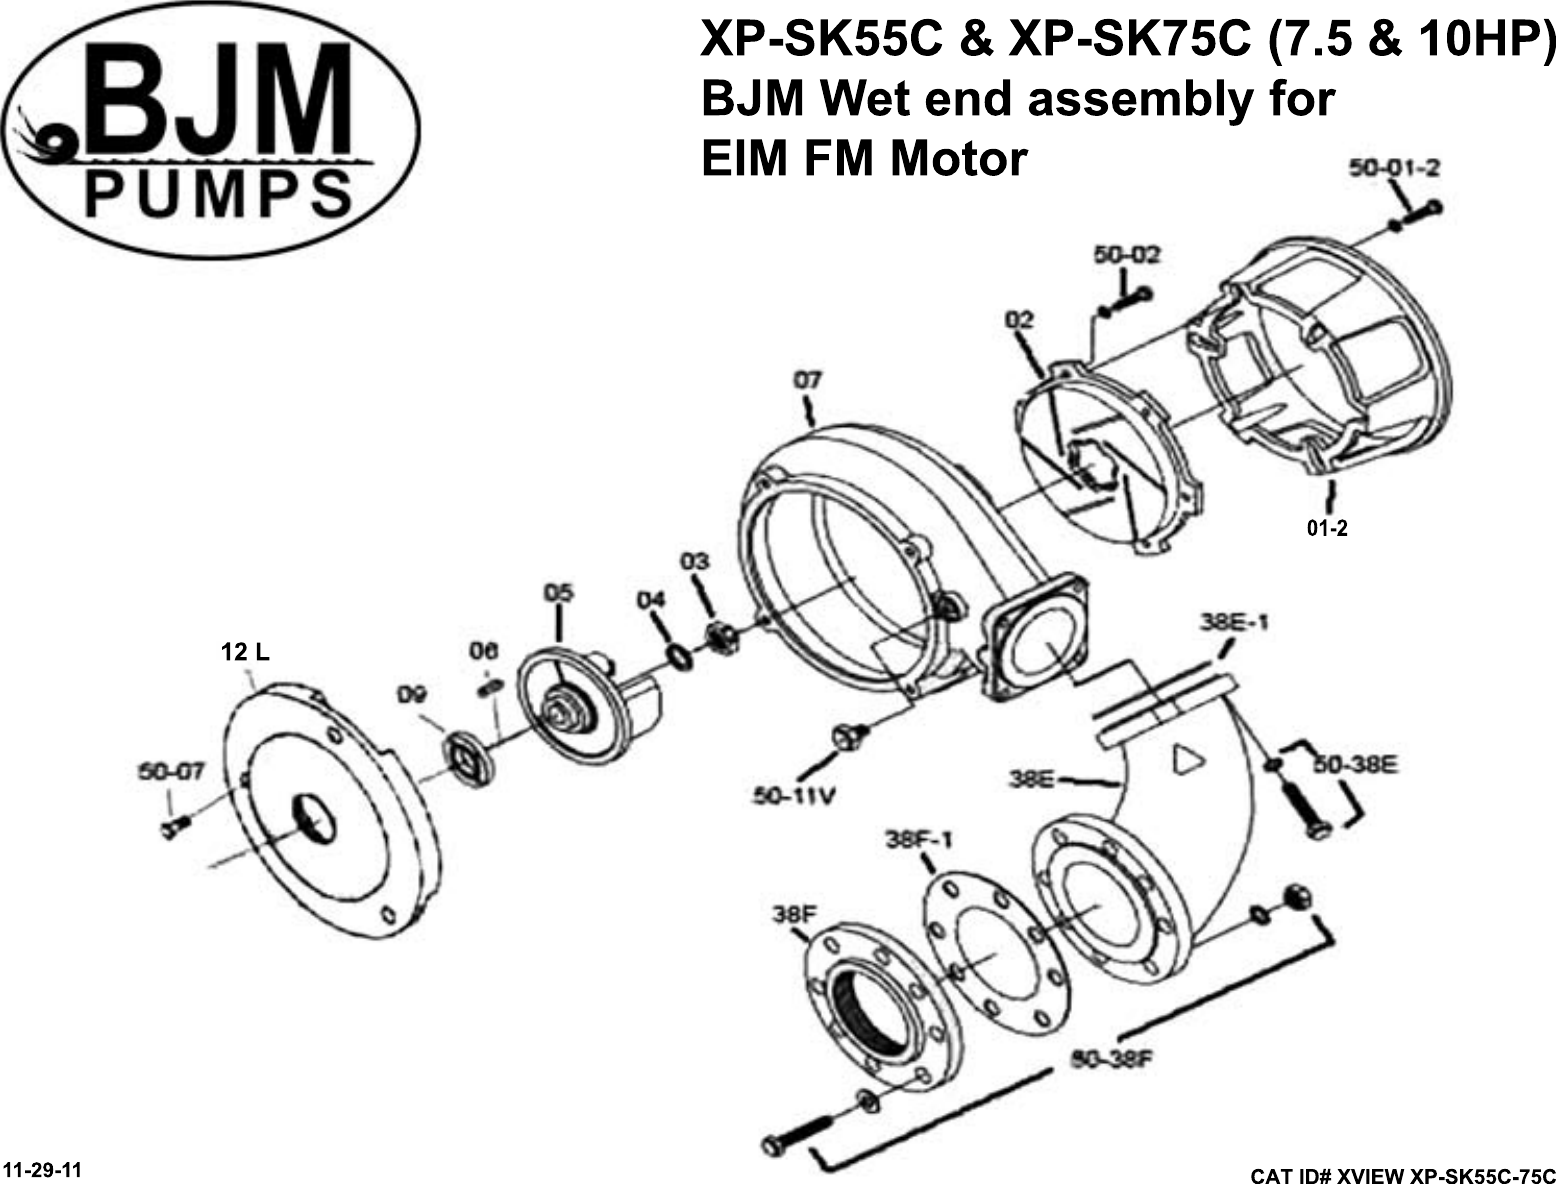 Page 3 of 4 - 136506 6 Bjm Xp-Sk Series Exploded View SK-XView-SK08C-SK15C 04-29-04.bmp User Manual